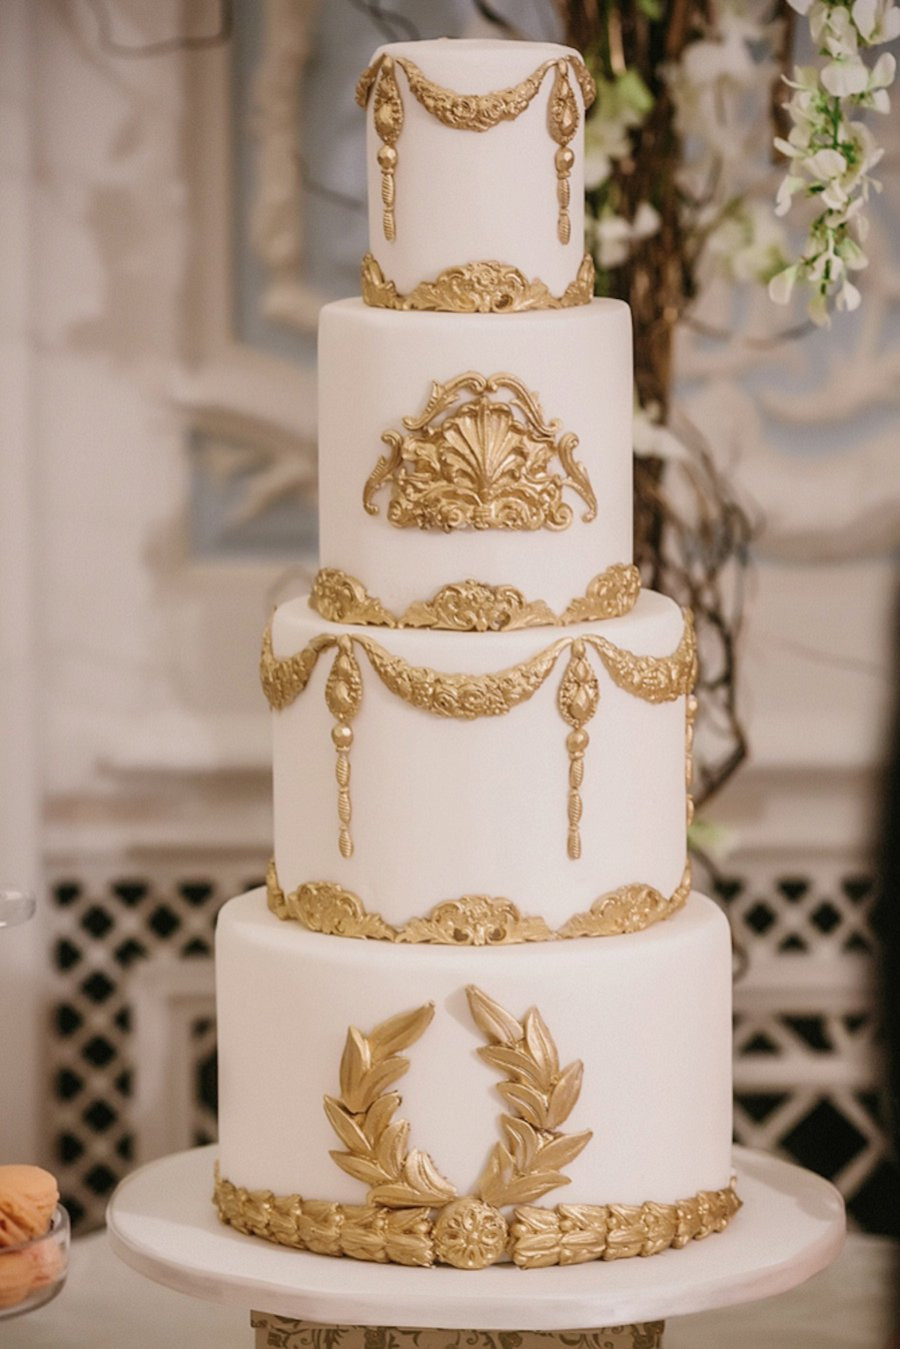 Wedding Cakes 2016
 Top 10 Wedding Cake Trends for 2016